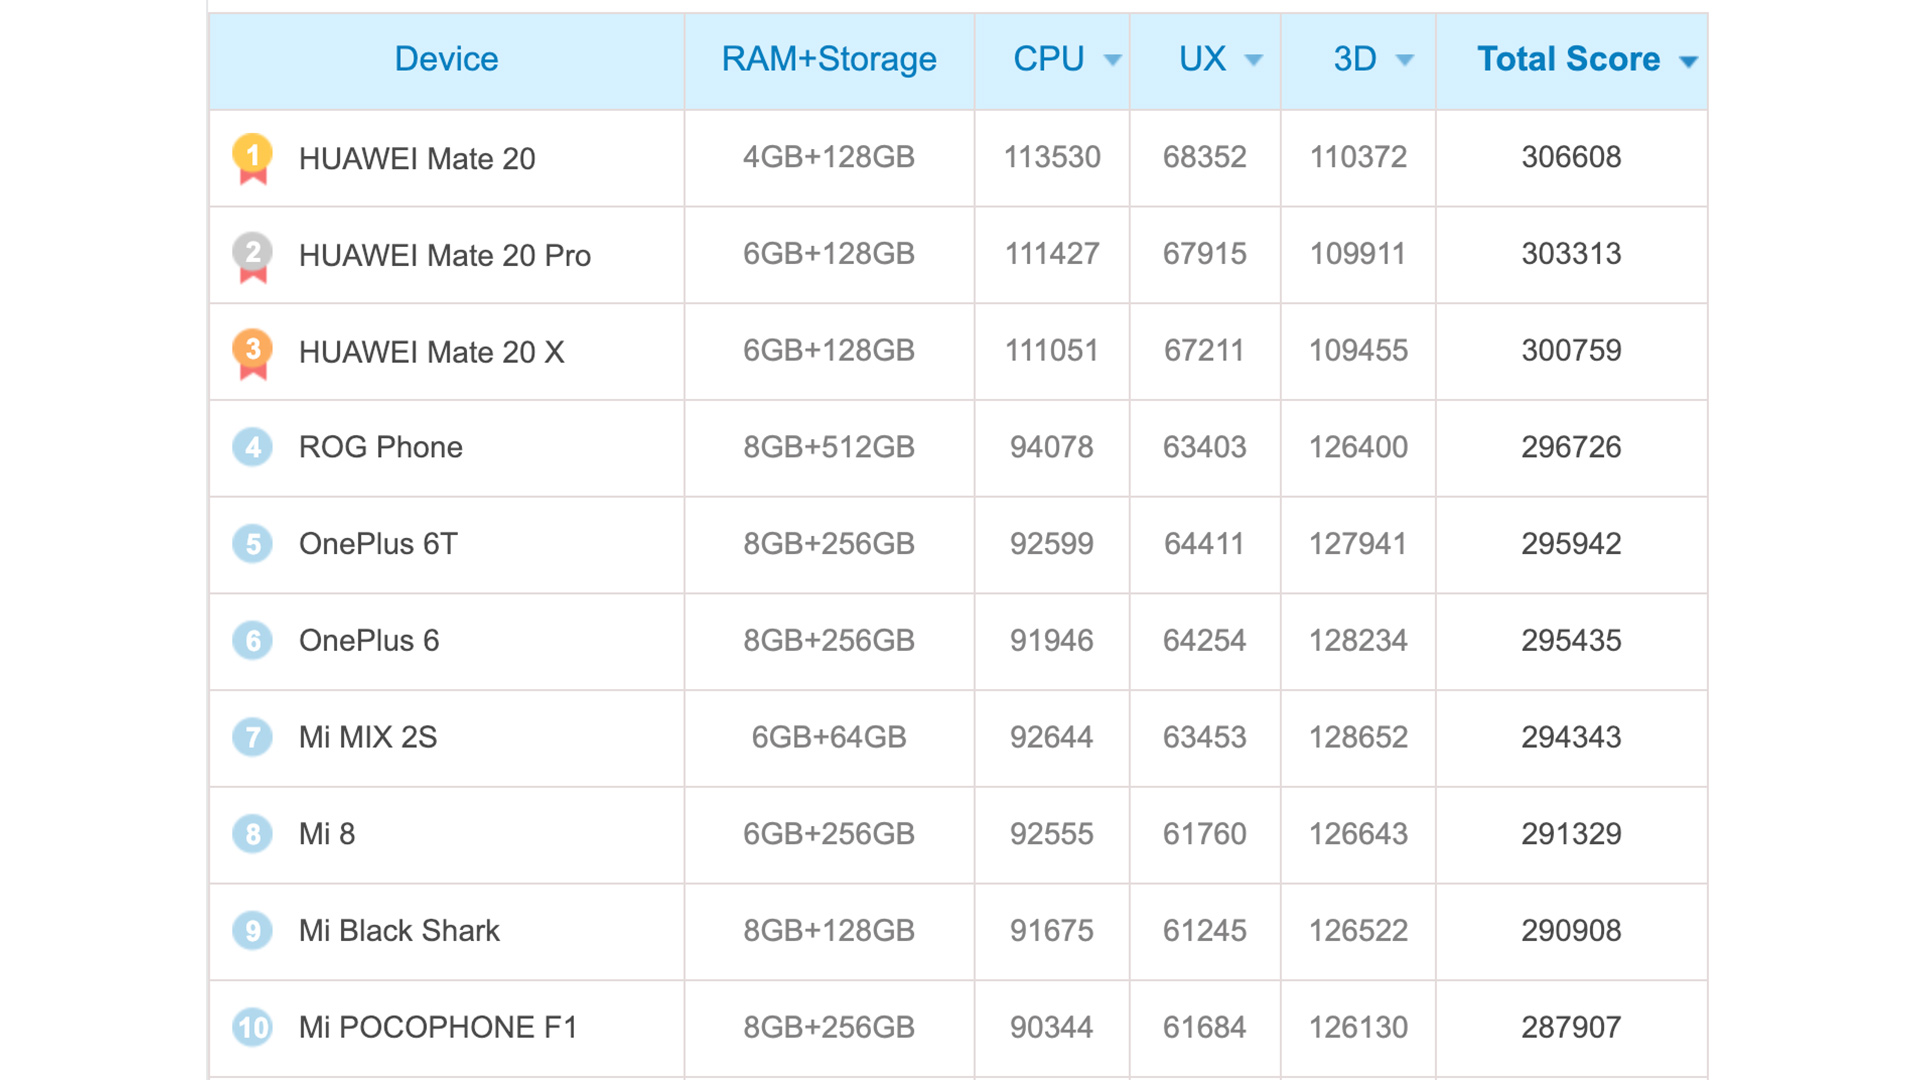 Antutu benchmark results for the Qualcomm Snapdragon 855